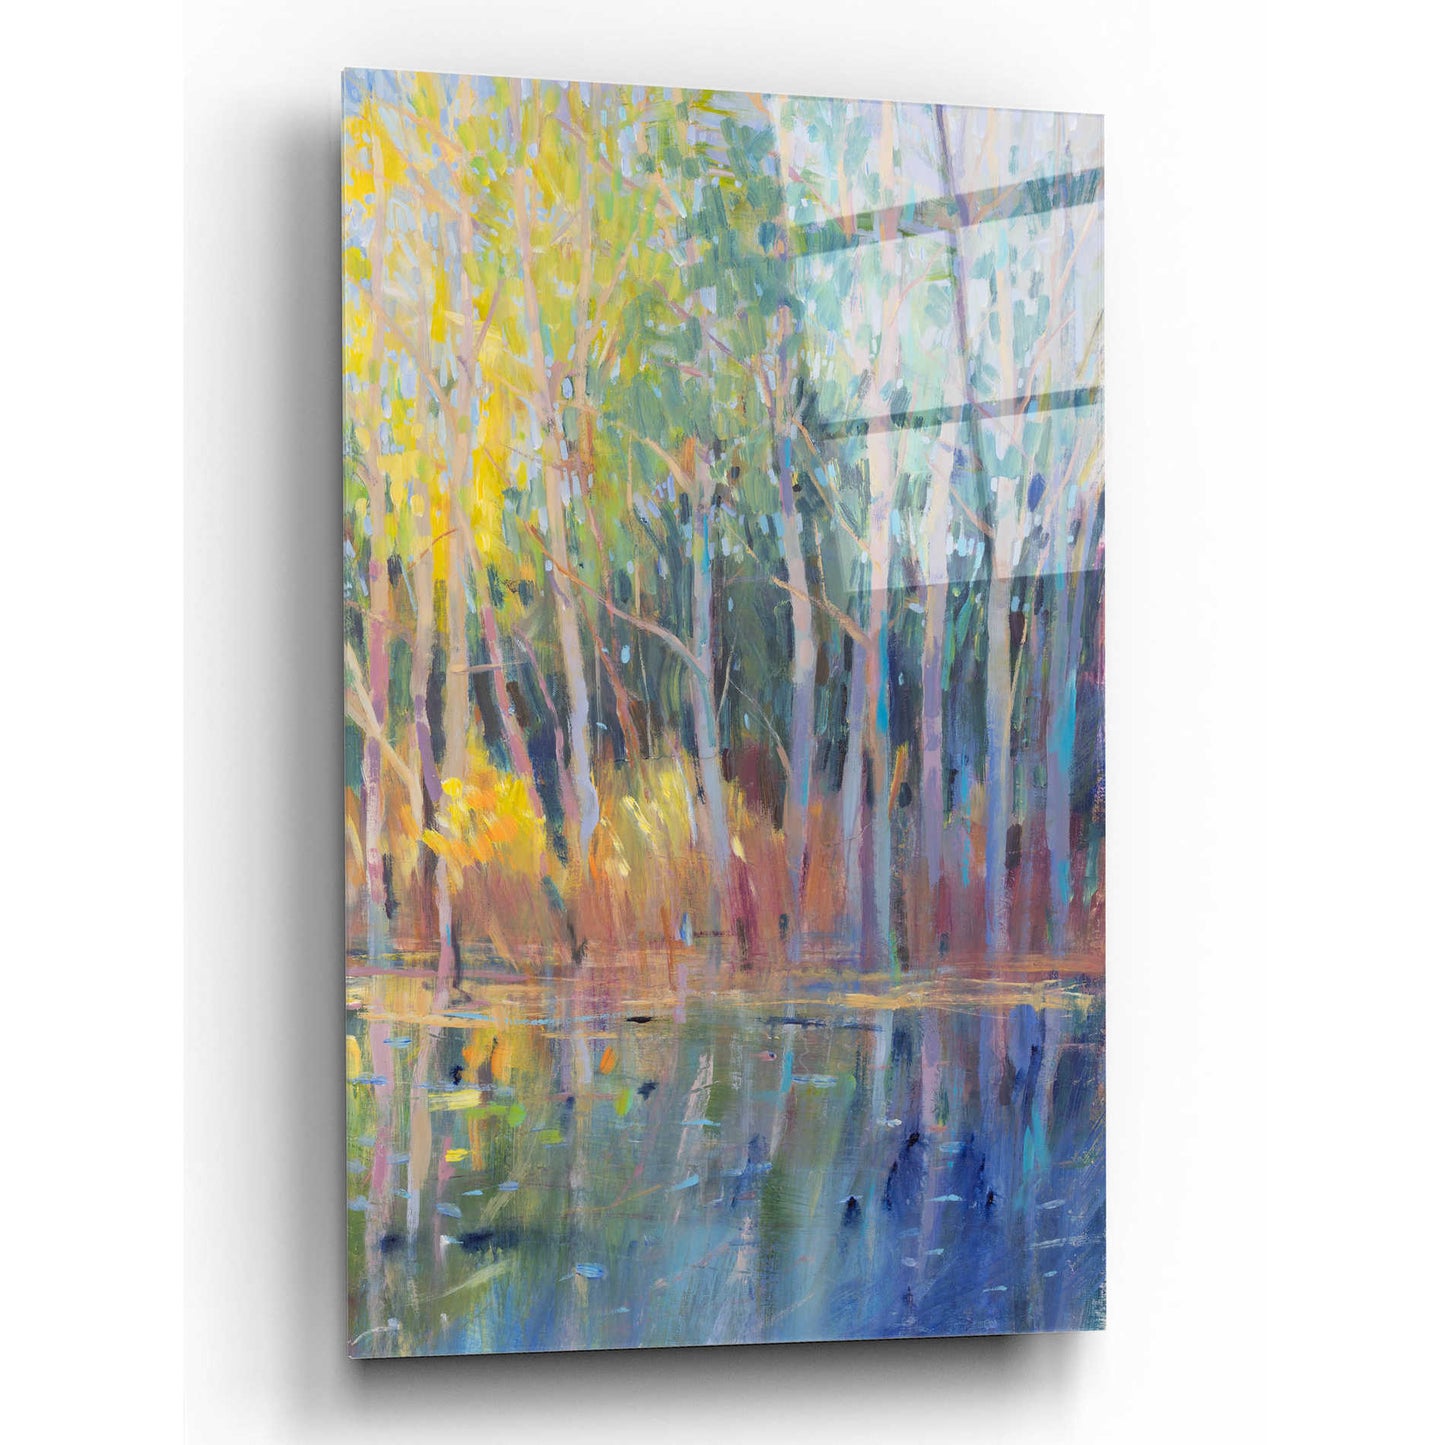 Epic Art 'Reflected Trees I' by Tim O'Toole, Acrylic Glass Wall Art,12x16